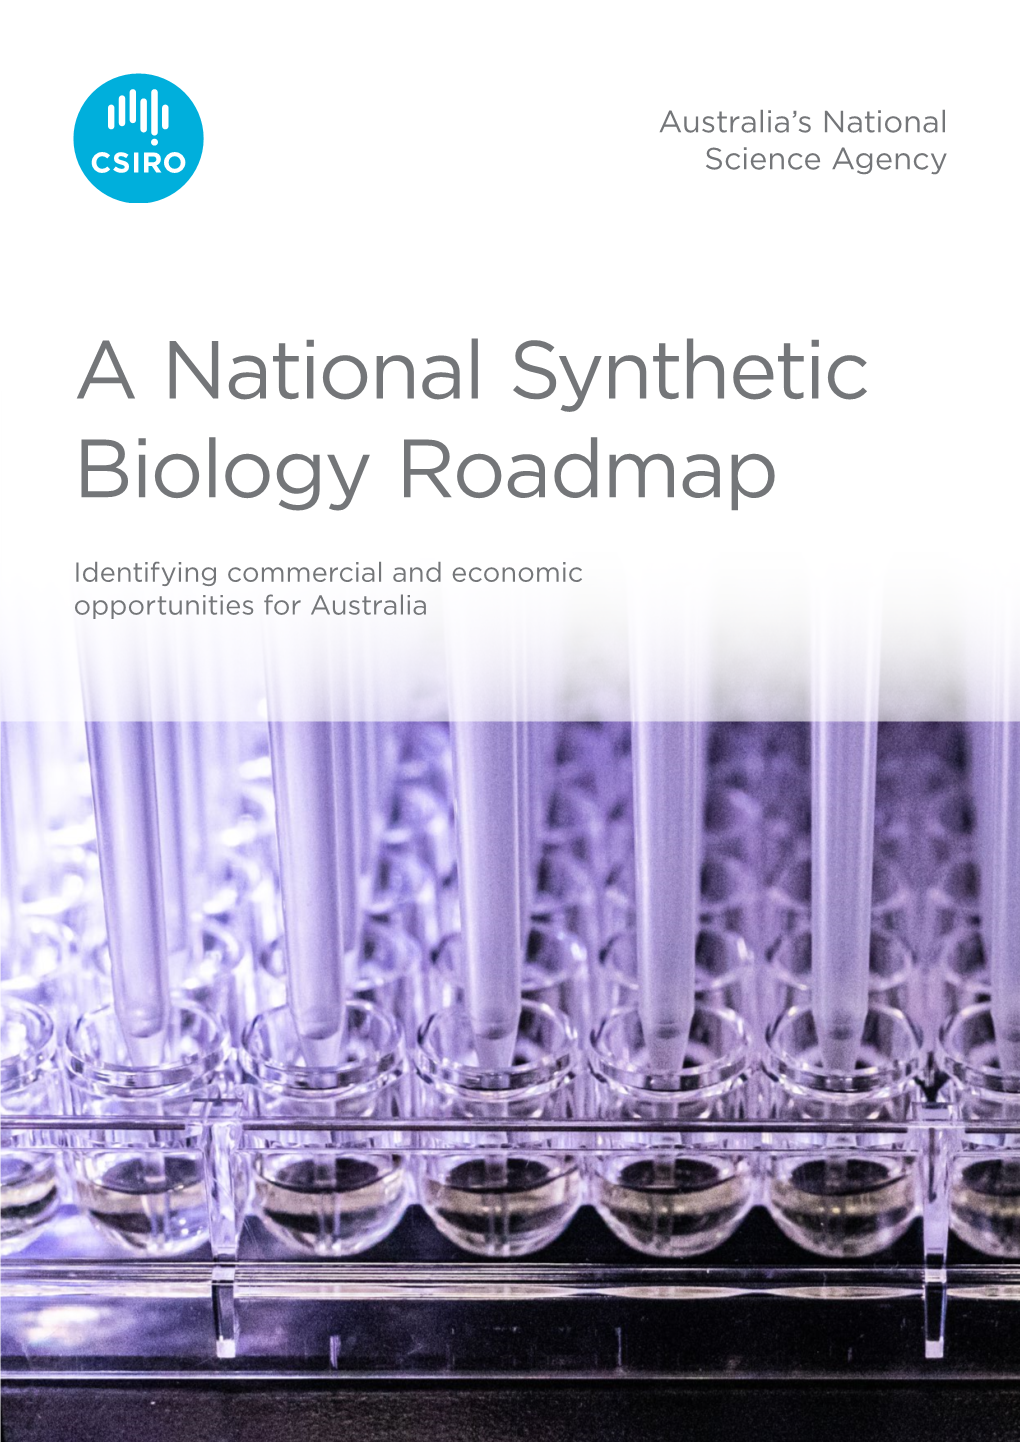 A National Synthetic Biology Roadmap